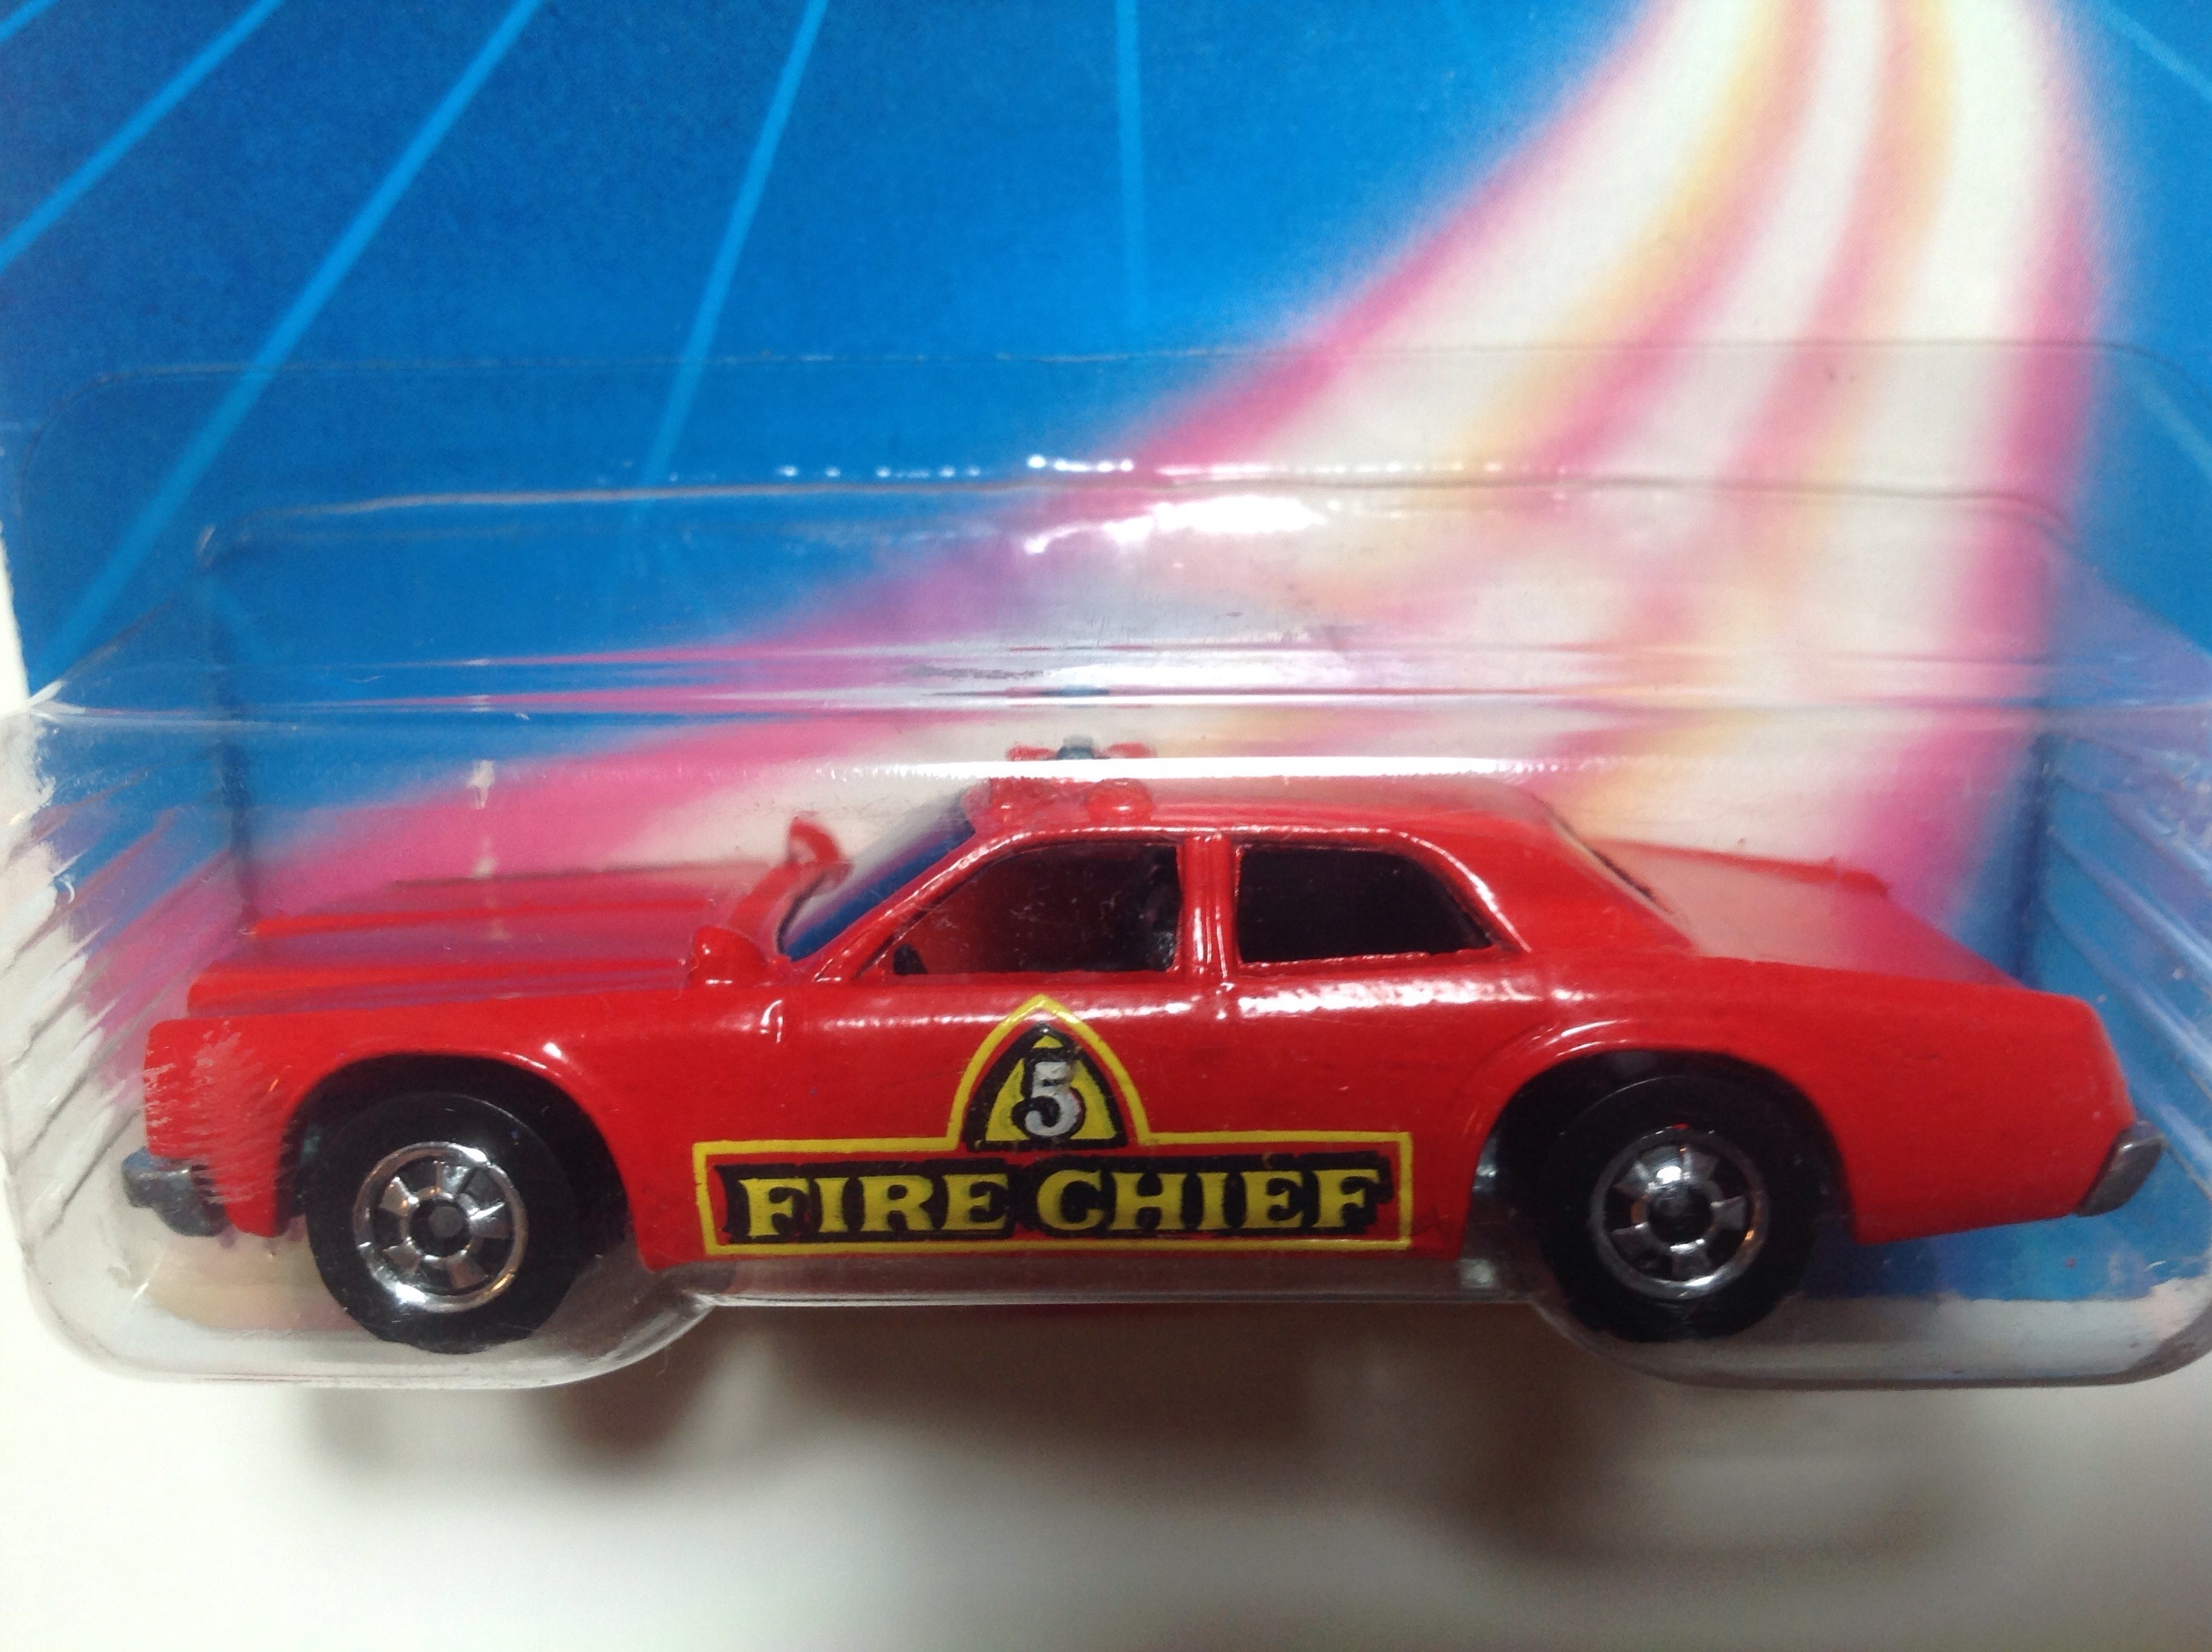 1982 Hot Wheels Redline 'Fire Chiefl' Reproduction Decal 4005 